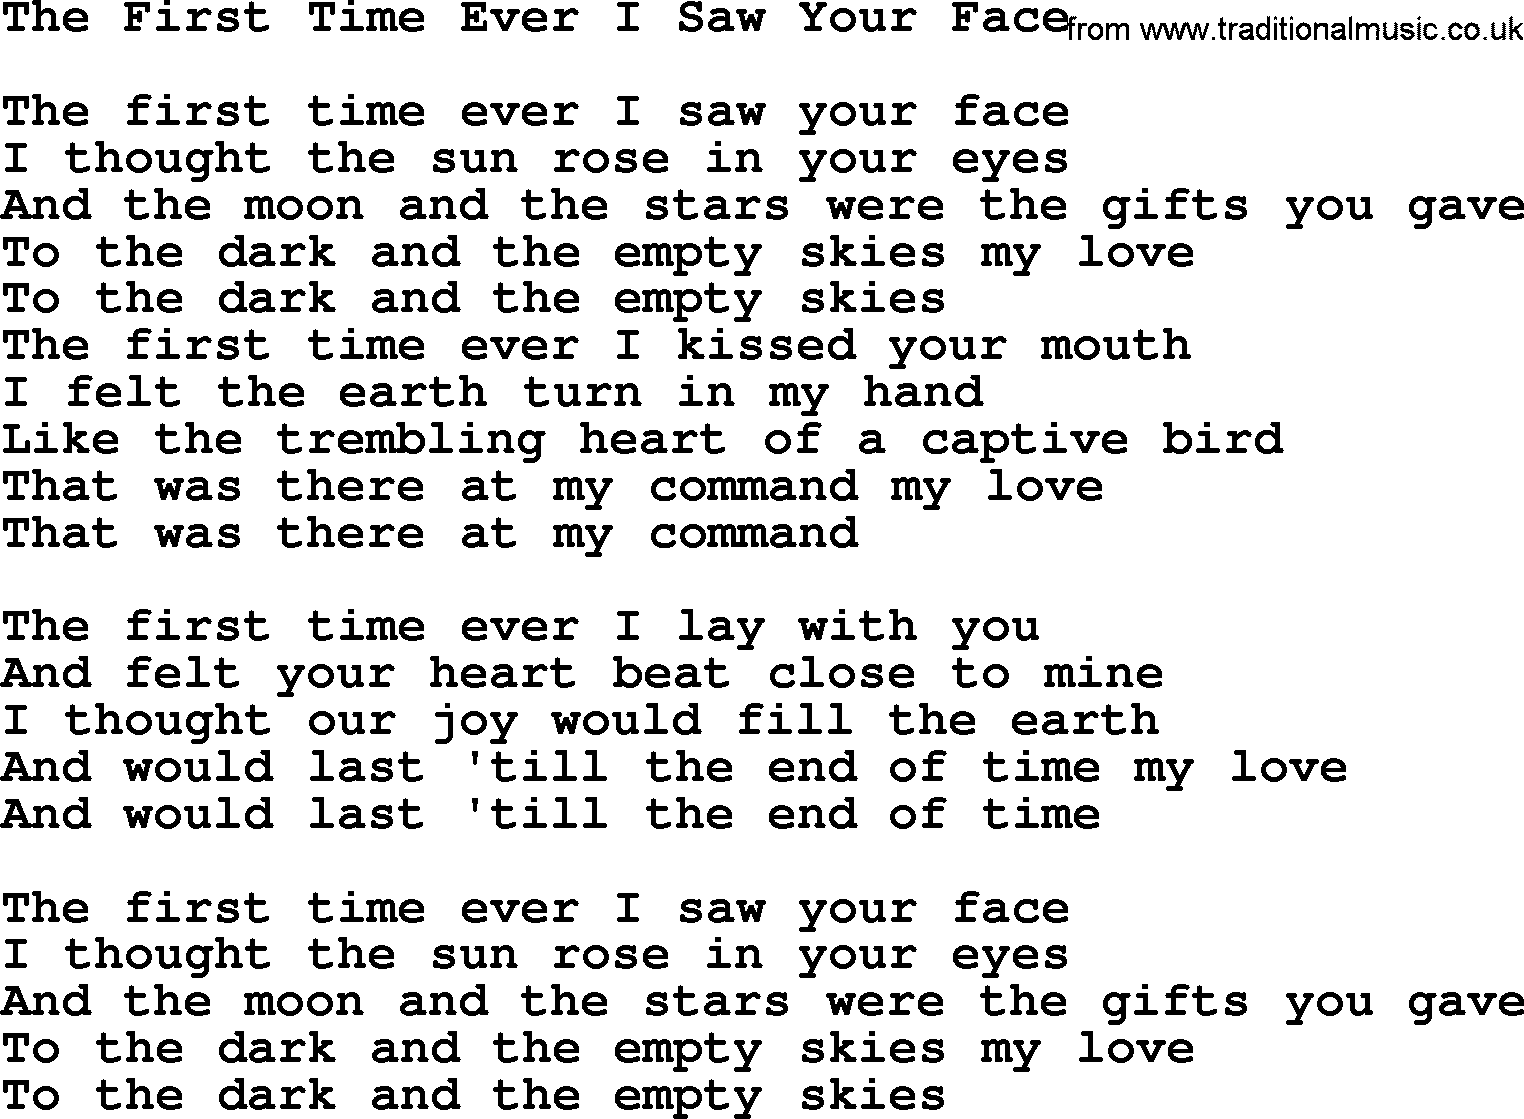 Gordon Lightfoot song The First Time Ever I Saw Your Face, lyrics